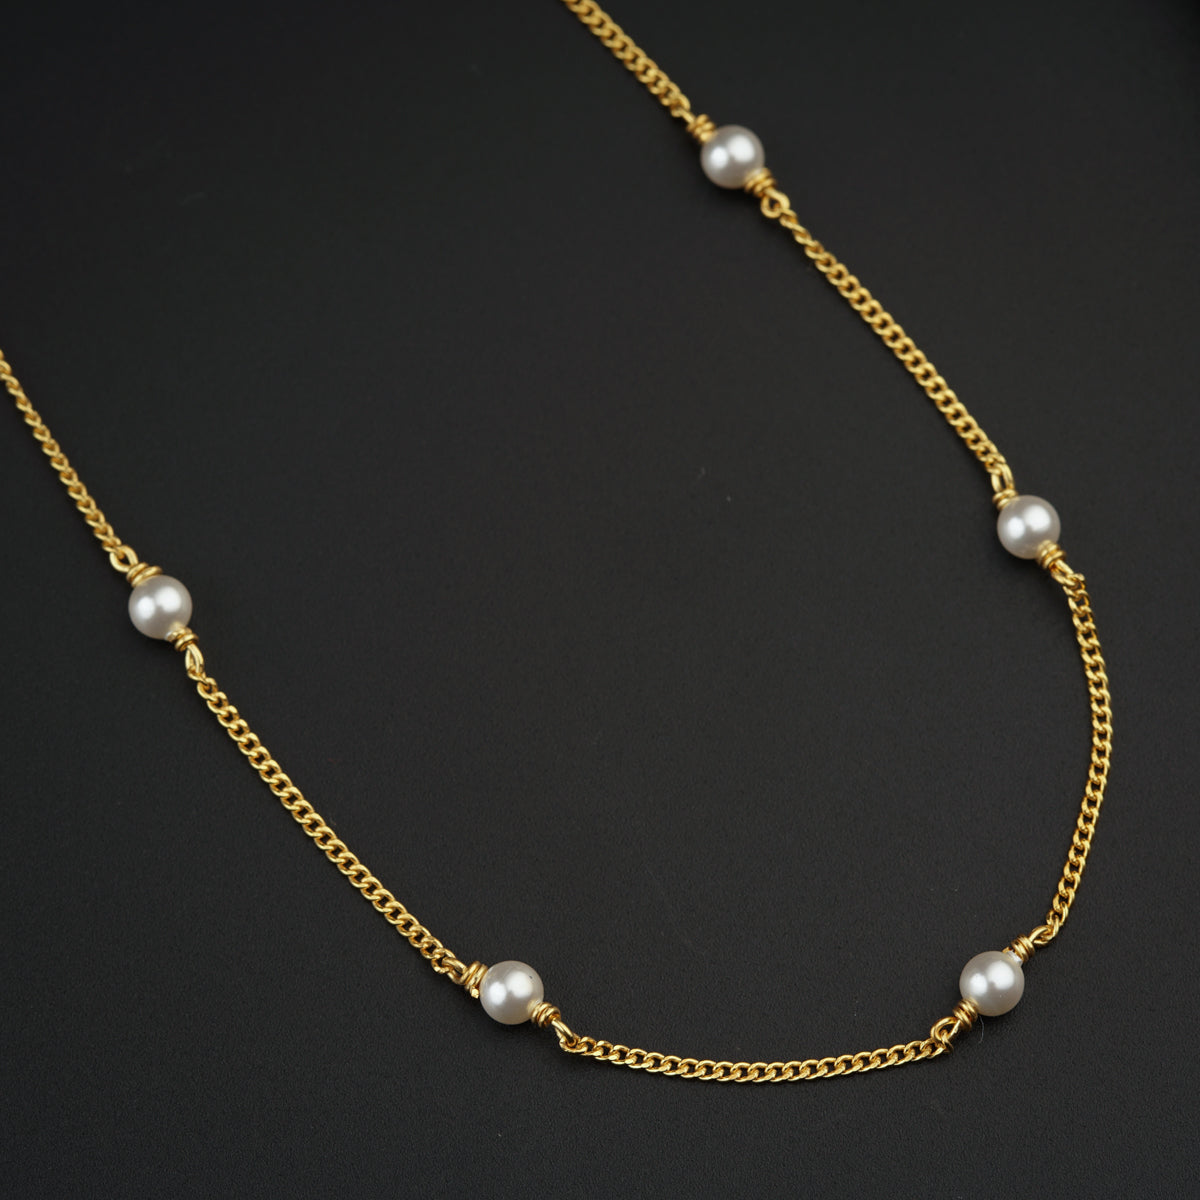 a gold necklace with pearls on a black surface